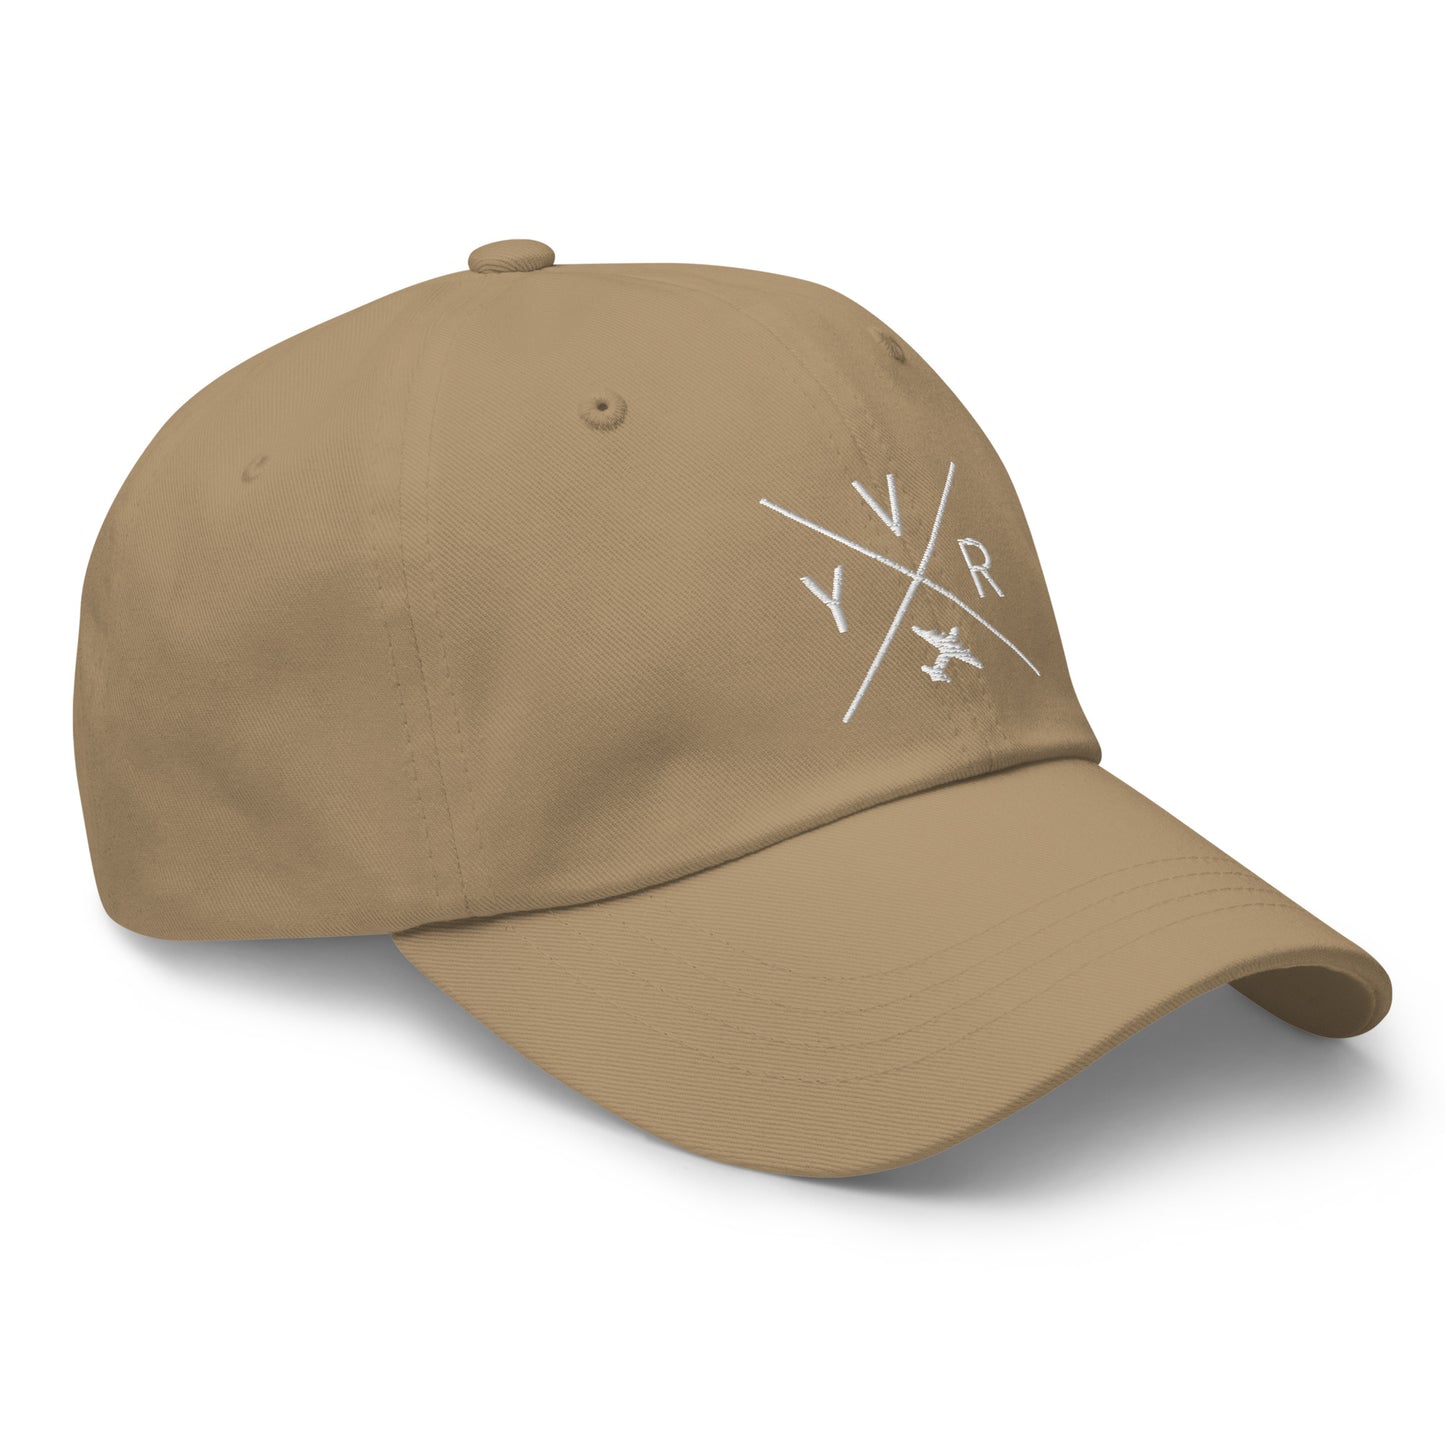 Crossed-X Dad Hat - White • YVR Vancouver • YHM Designs - Image 16